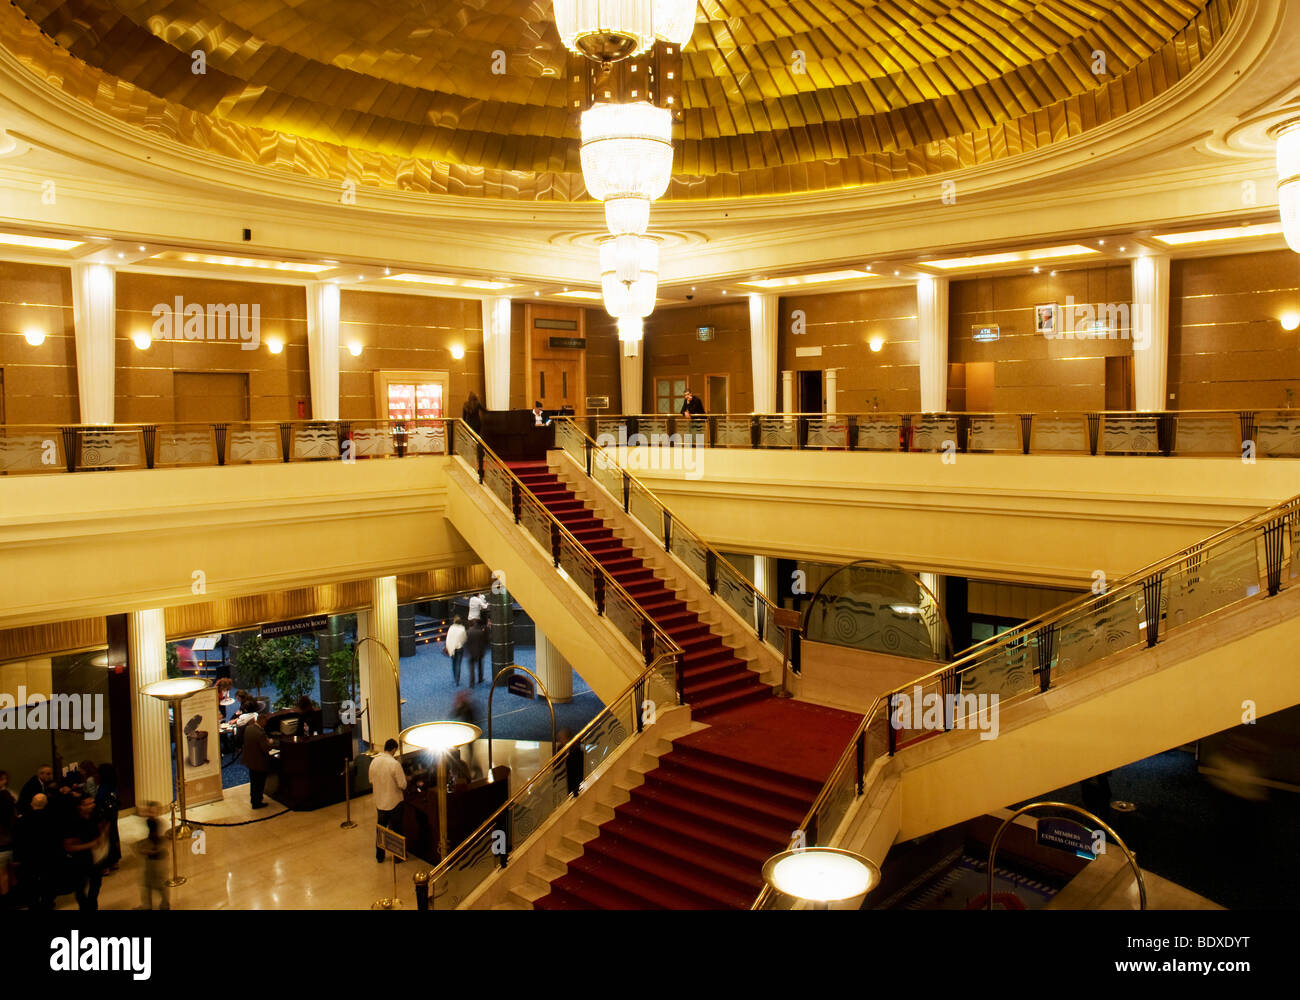 The interior of Casino Du Liban, Lebanon's famed casino facility, showing the lobby and grand staircase, and a huge chandelier Stock Photo